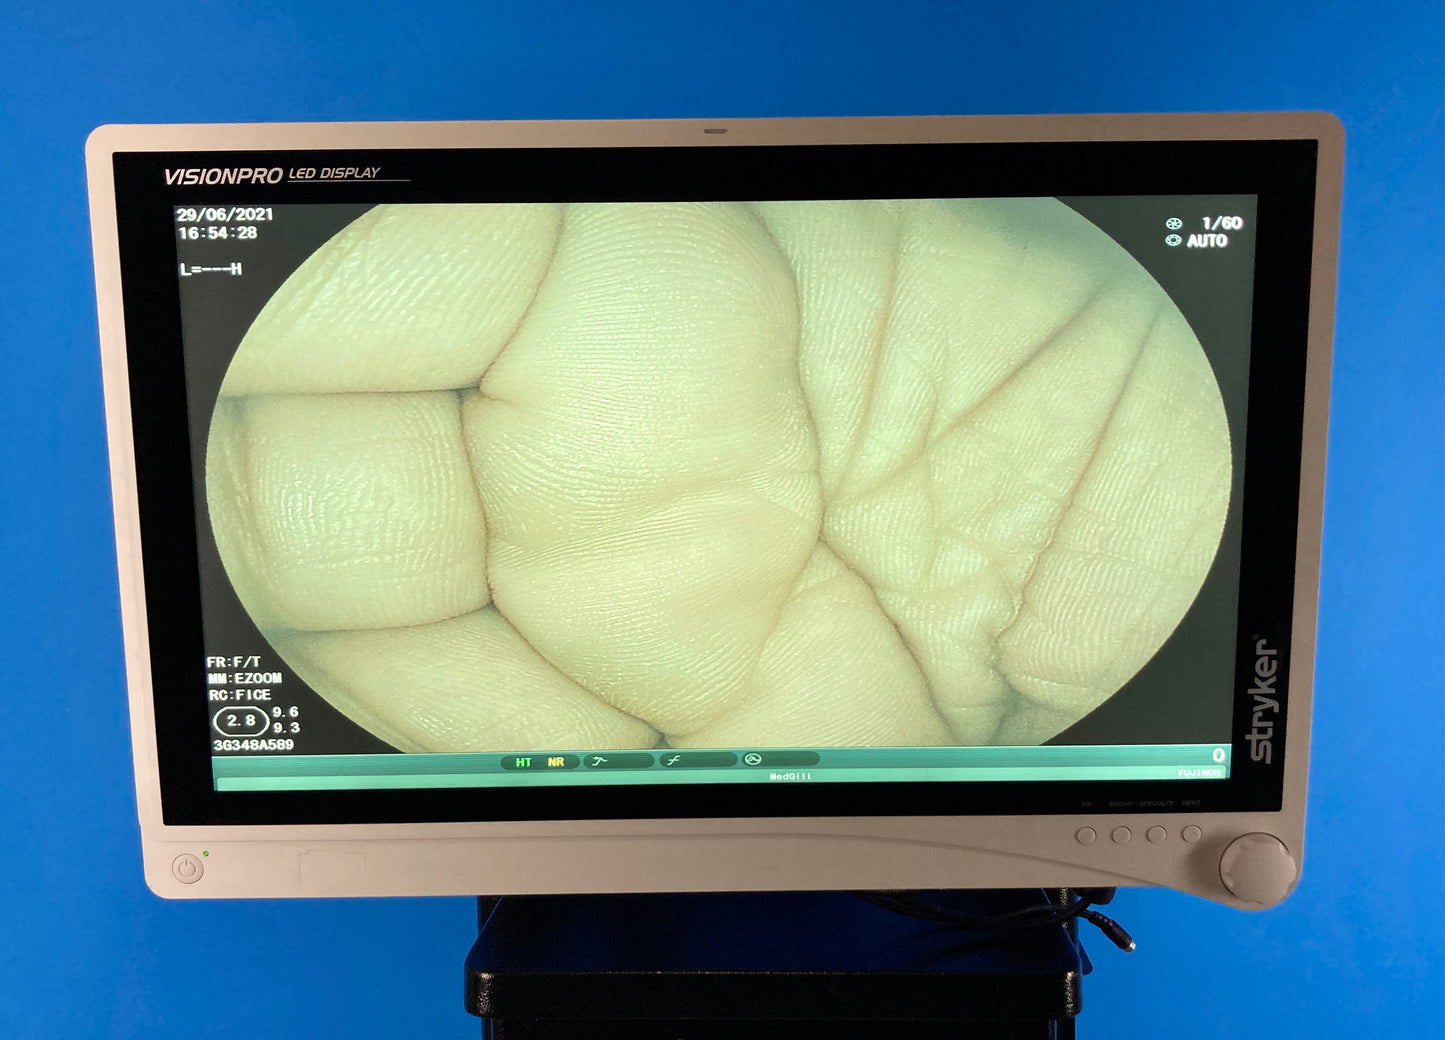 Stryker Visionpro LED Monitor Video center Endoscope Visualization System displays with FICE dual mode